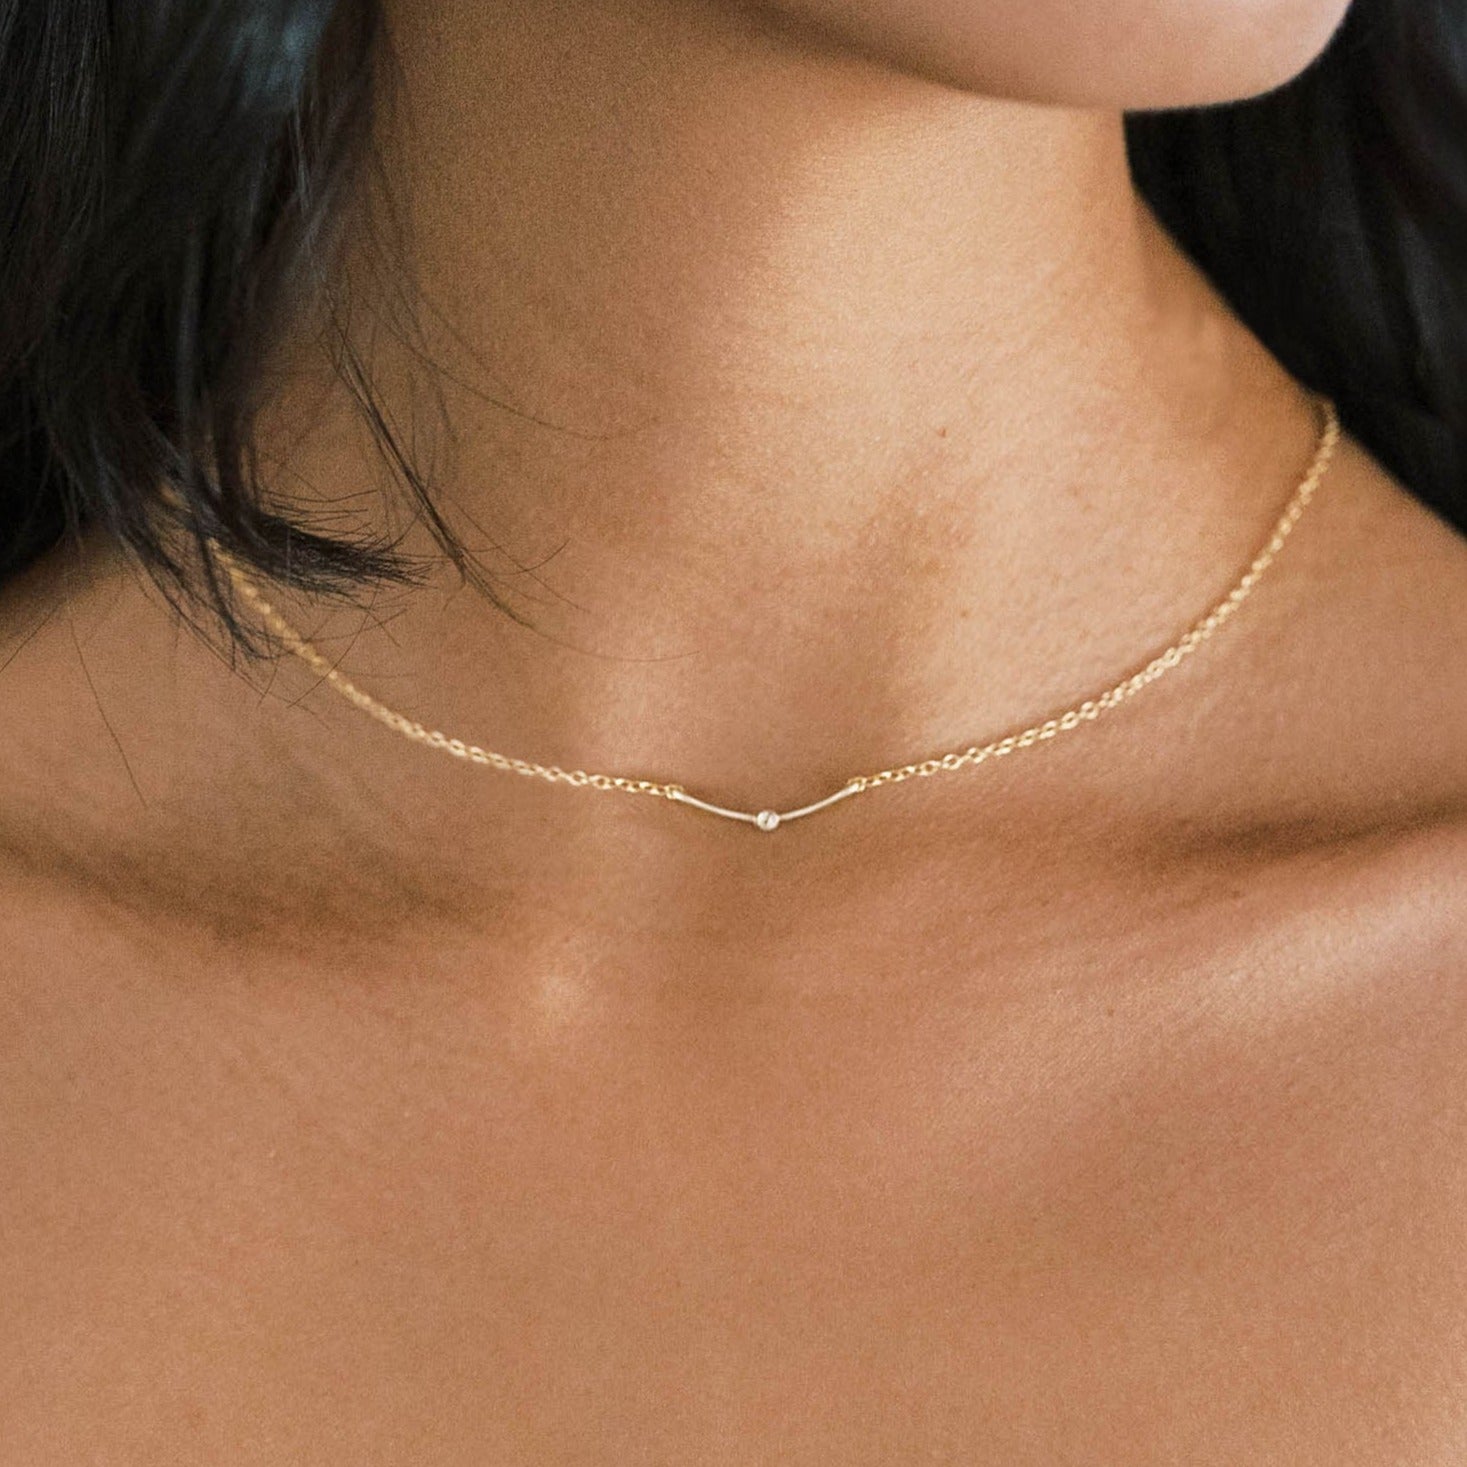 Thin gold chain with curved bar pendant. Small crystal gemstone in the center.